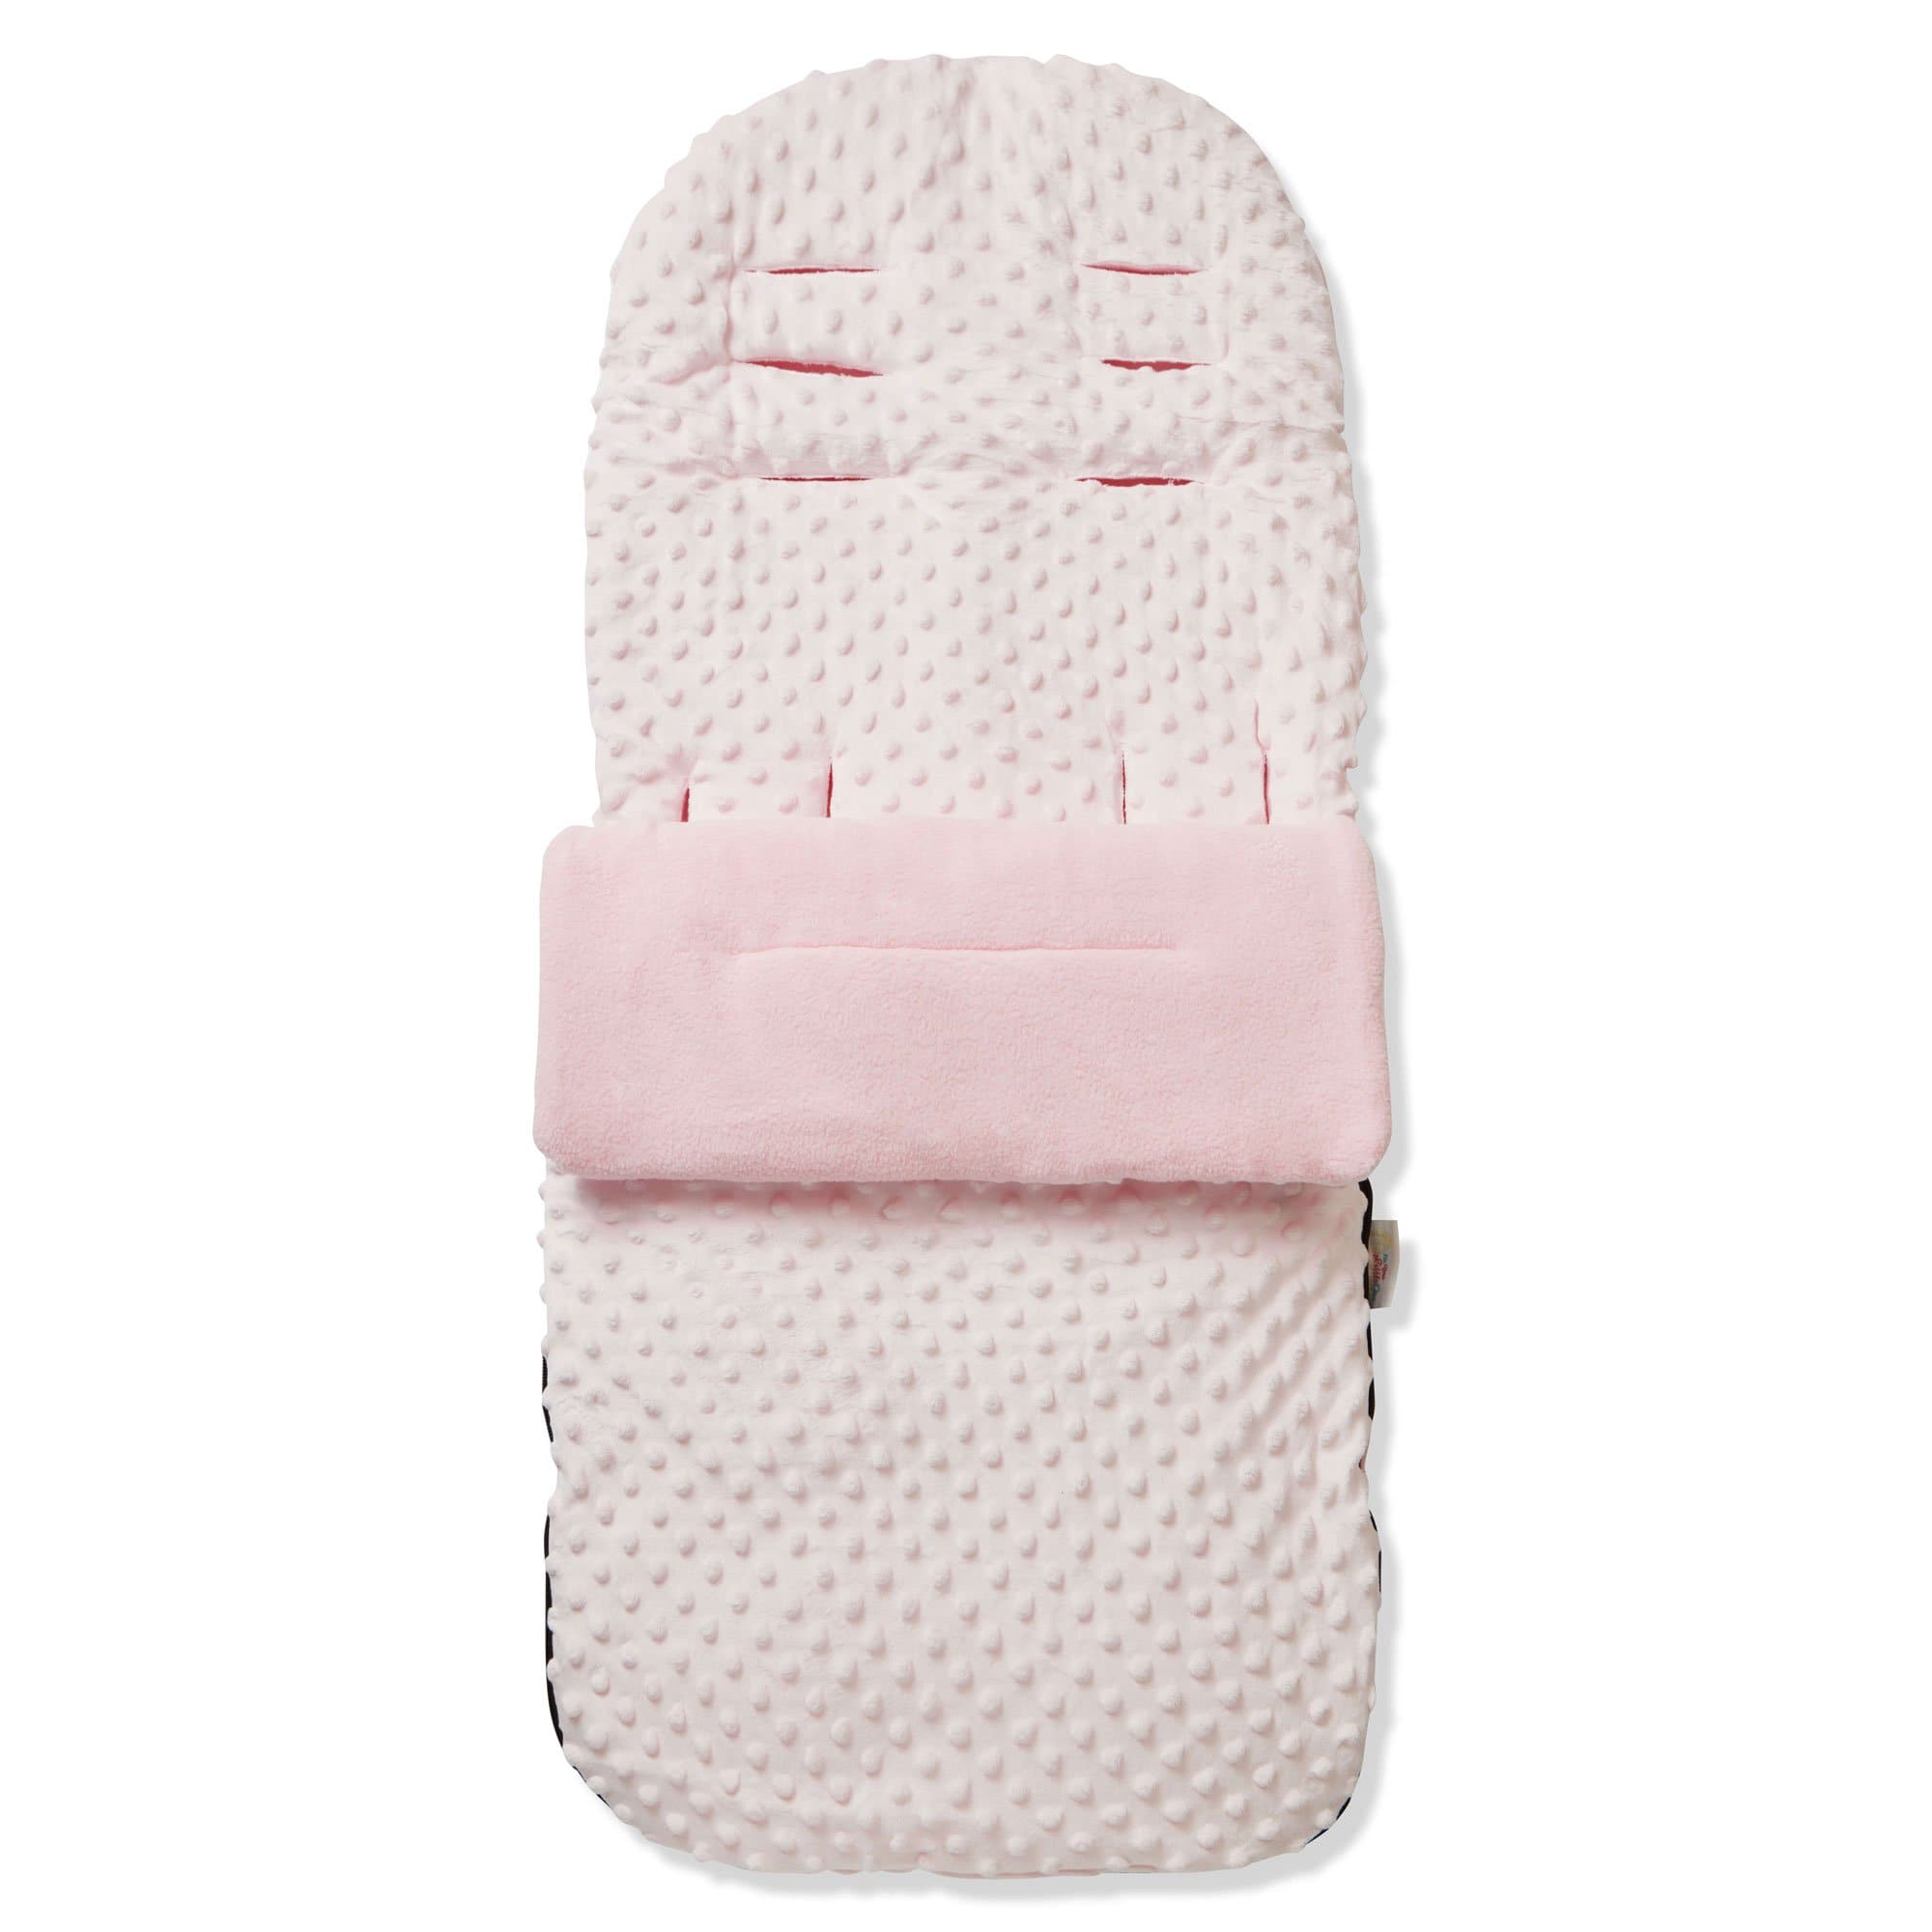 Dimple Footmuff / Cosy Toes Compatible with NeoNato - Pink / Fits All Models | For Your Little One